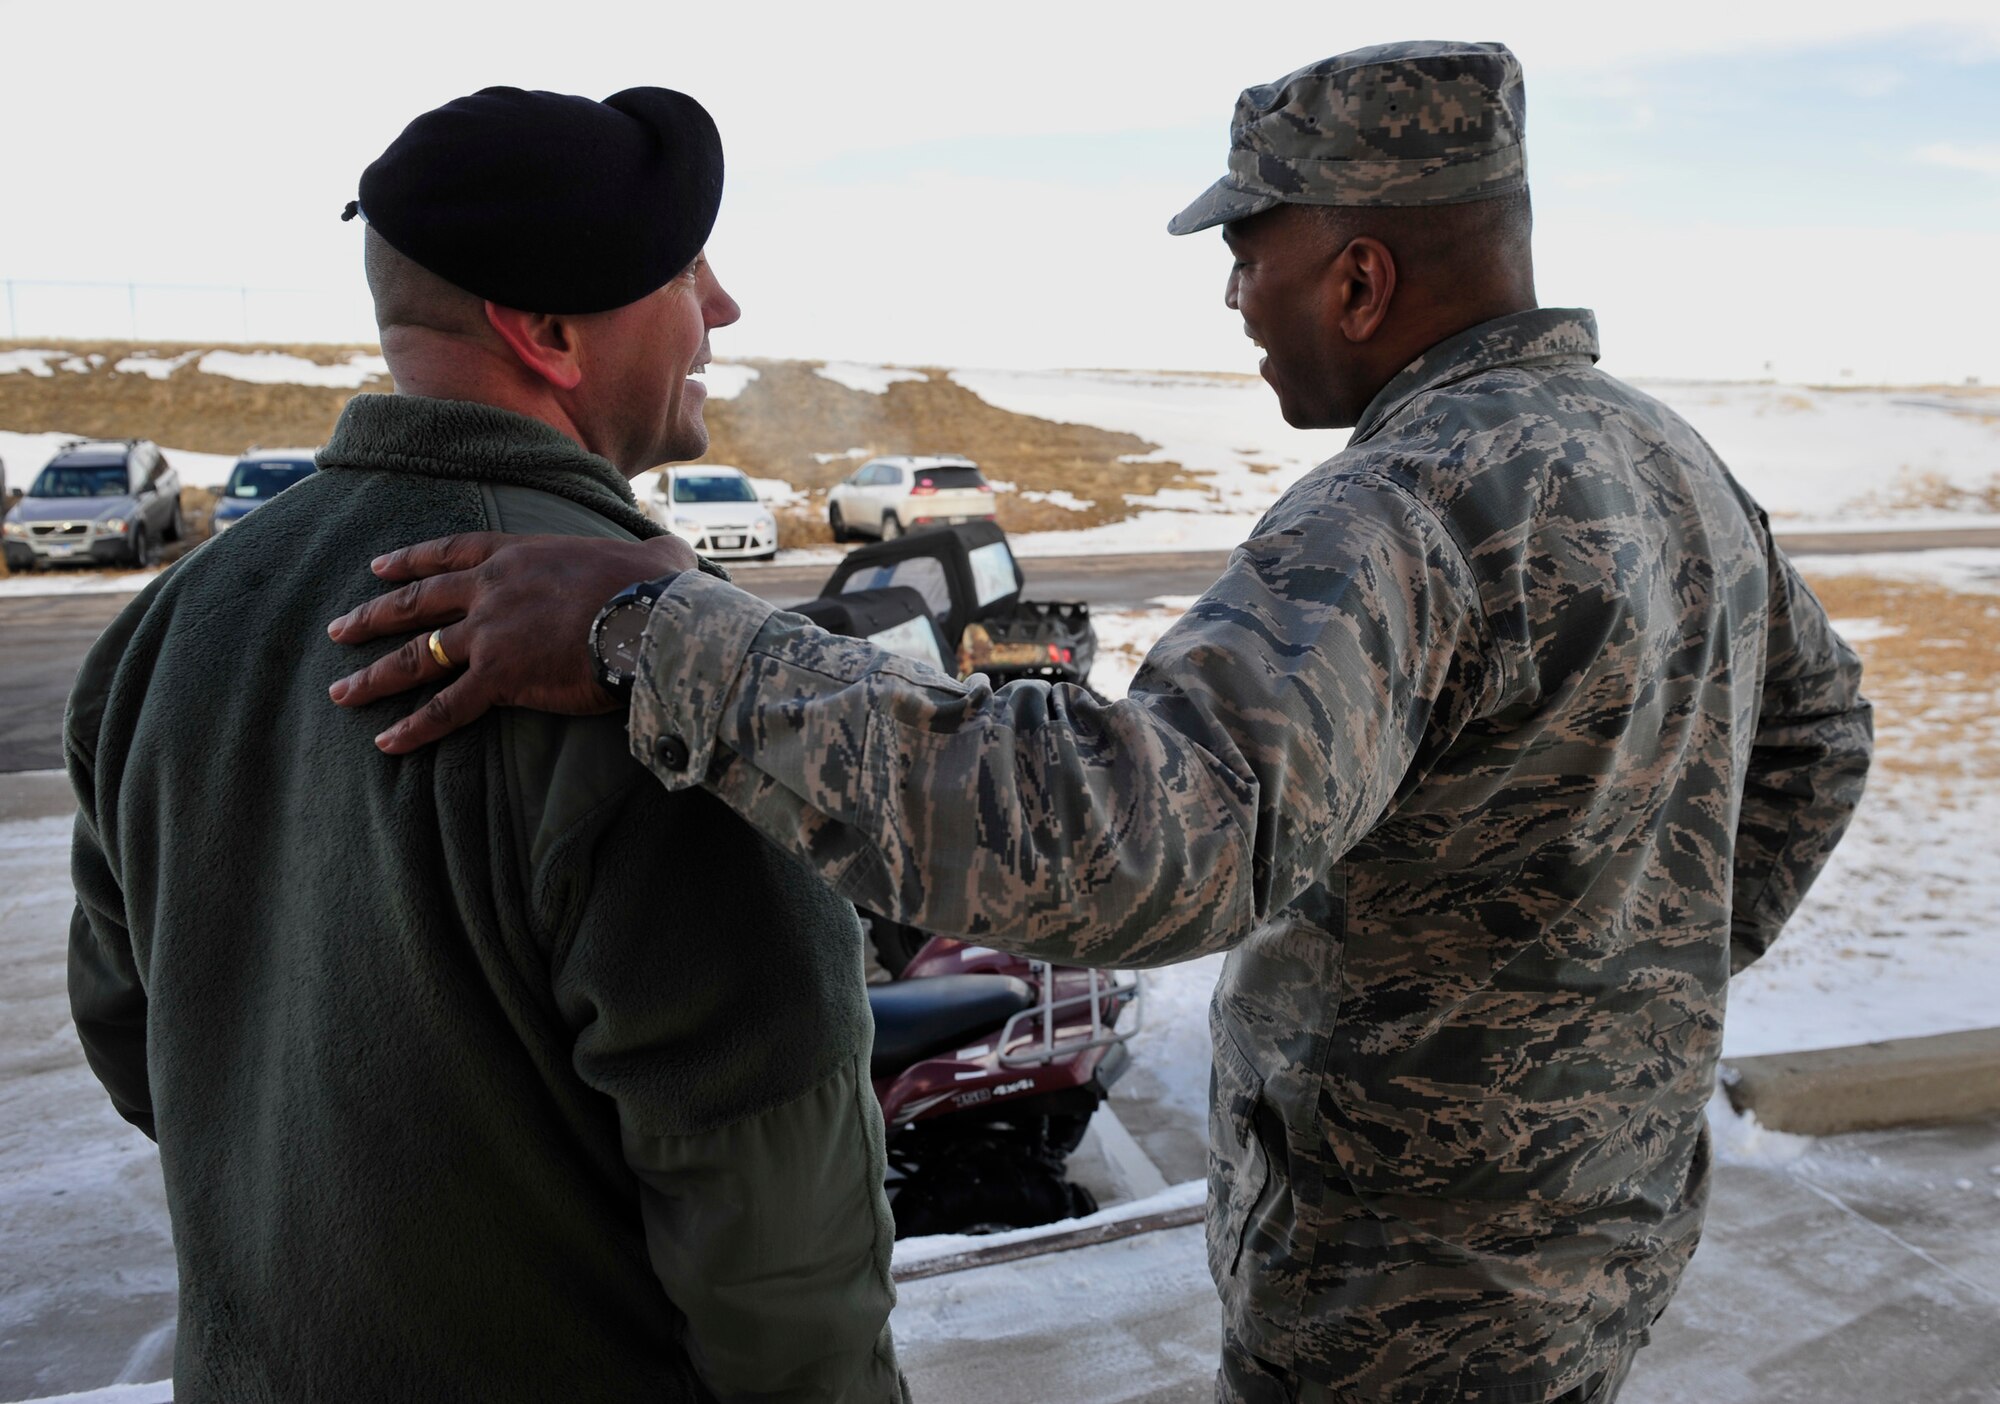 Master Sgt. Tyler Conner, 28th Security Forces Squadron NCO in charge of security forces training, left, talks with Maj. Gen. Richard Clark, Eighth Air Force commander, about the all-terrain vehicles the security forces squadron use to access off-road locations at Ellsworth Air Force Base, S.D., Jan. 19, 2016. Clark visited with various squadrons, learning their roles in the base’s mission, and getting to know the bomber Airmen of the 28th Bomb Wing. (U.S. Air Force photo by Airman 1st Class James L. Miller/Released)